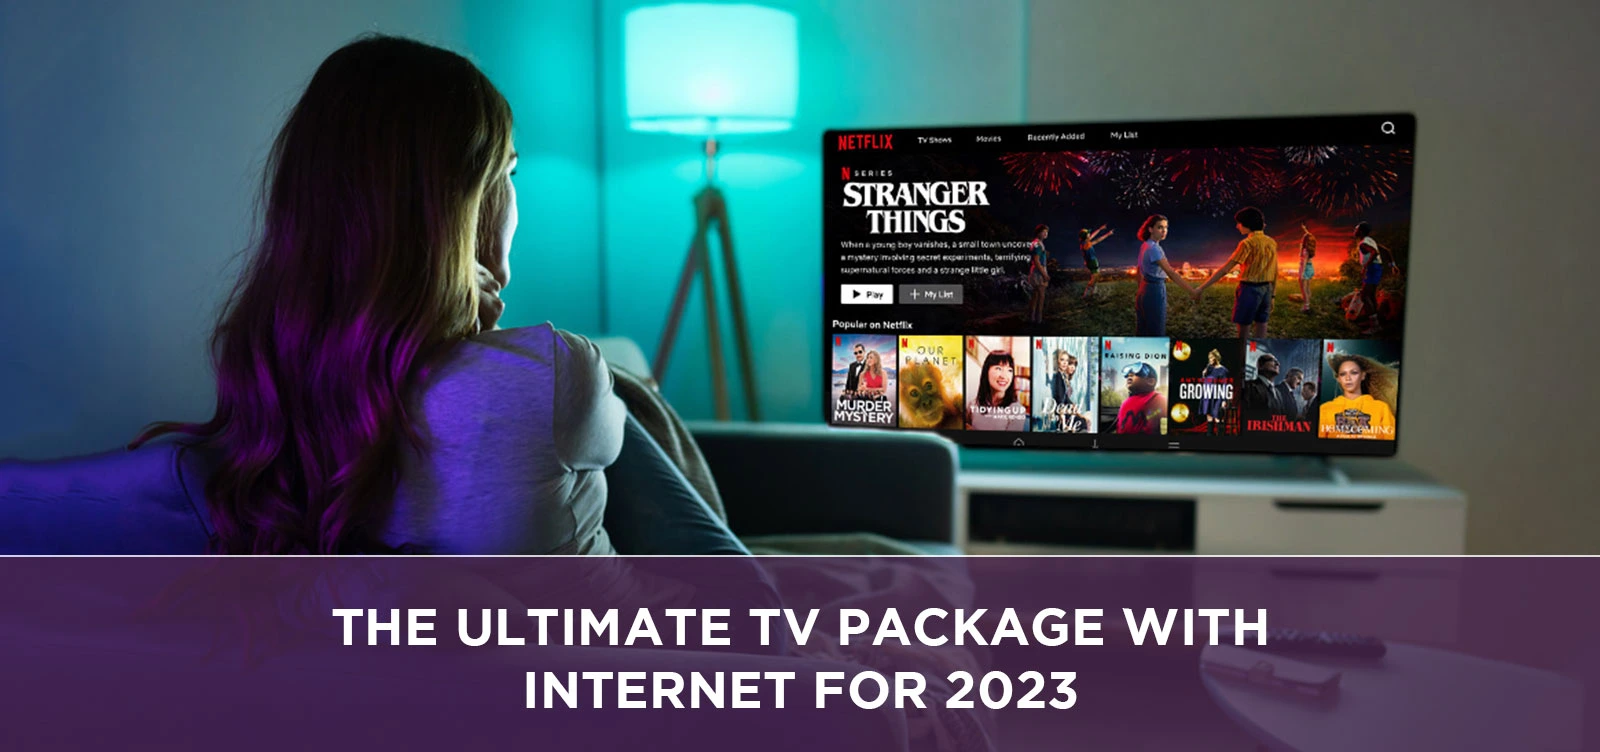 The most recommended TV packages with internet for 2023